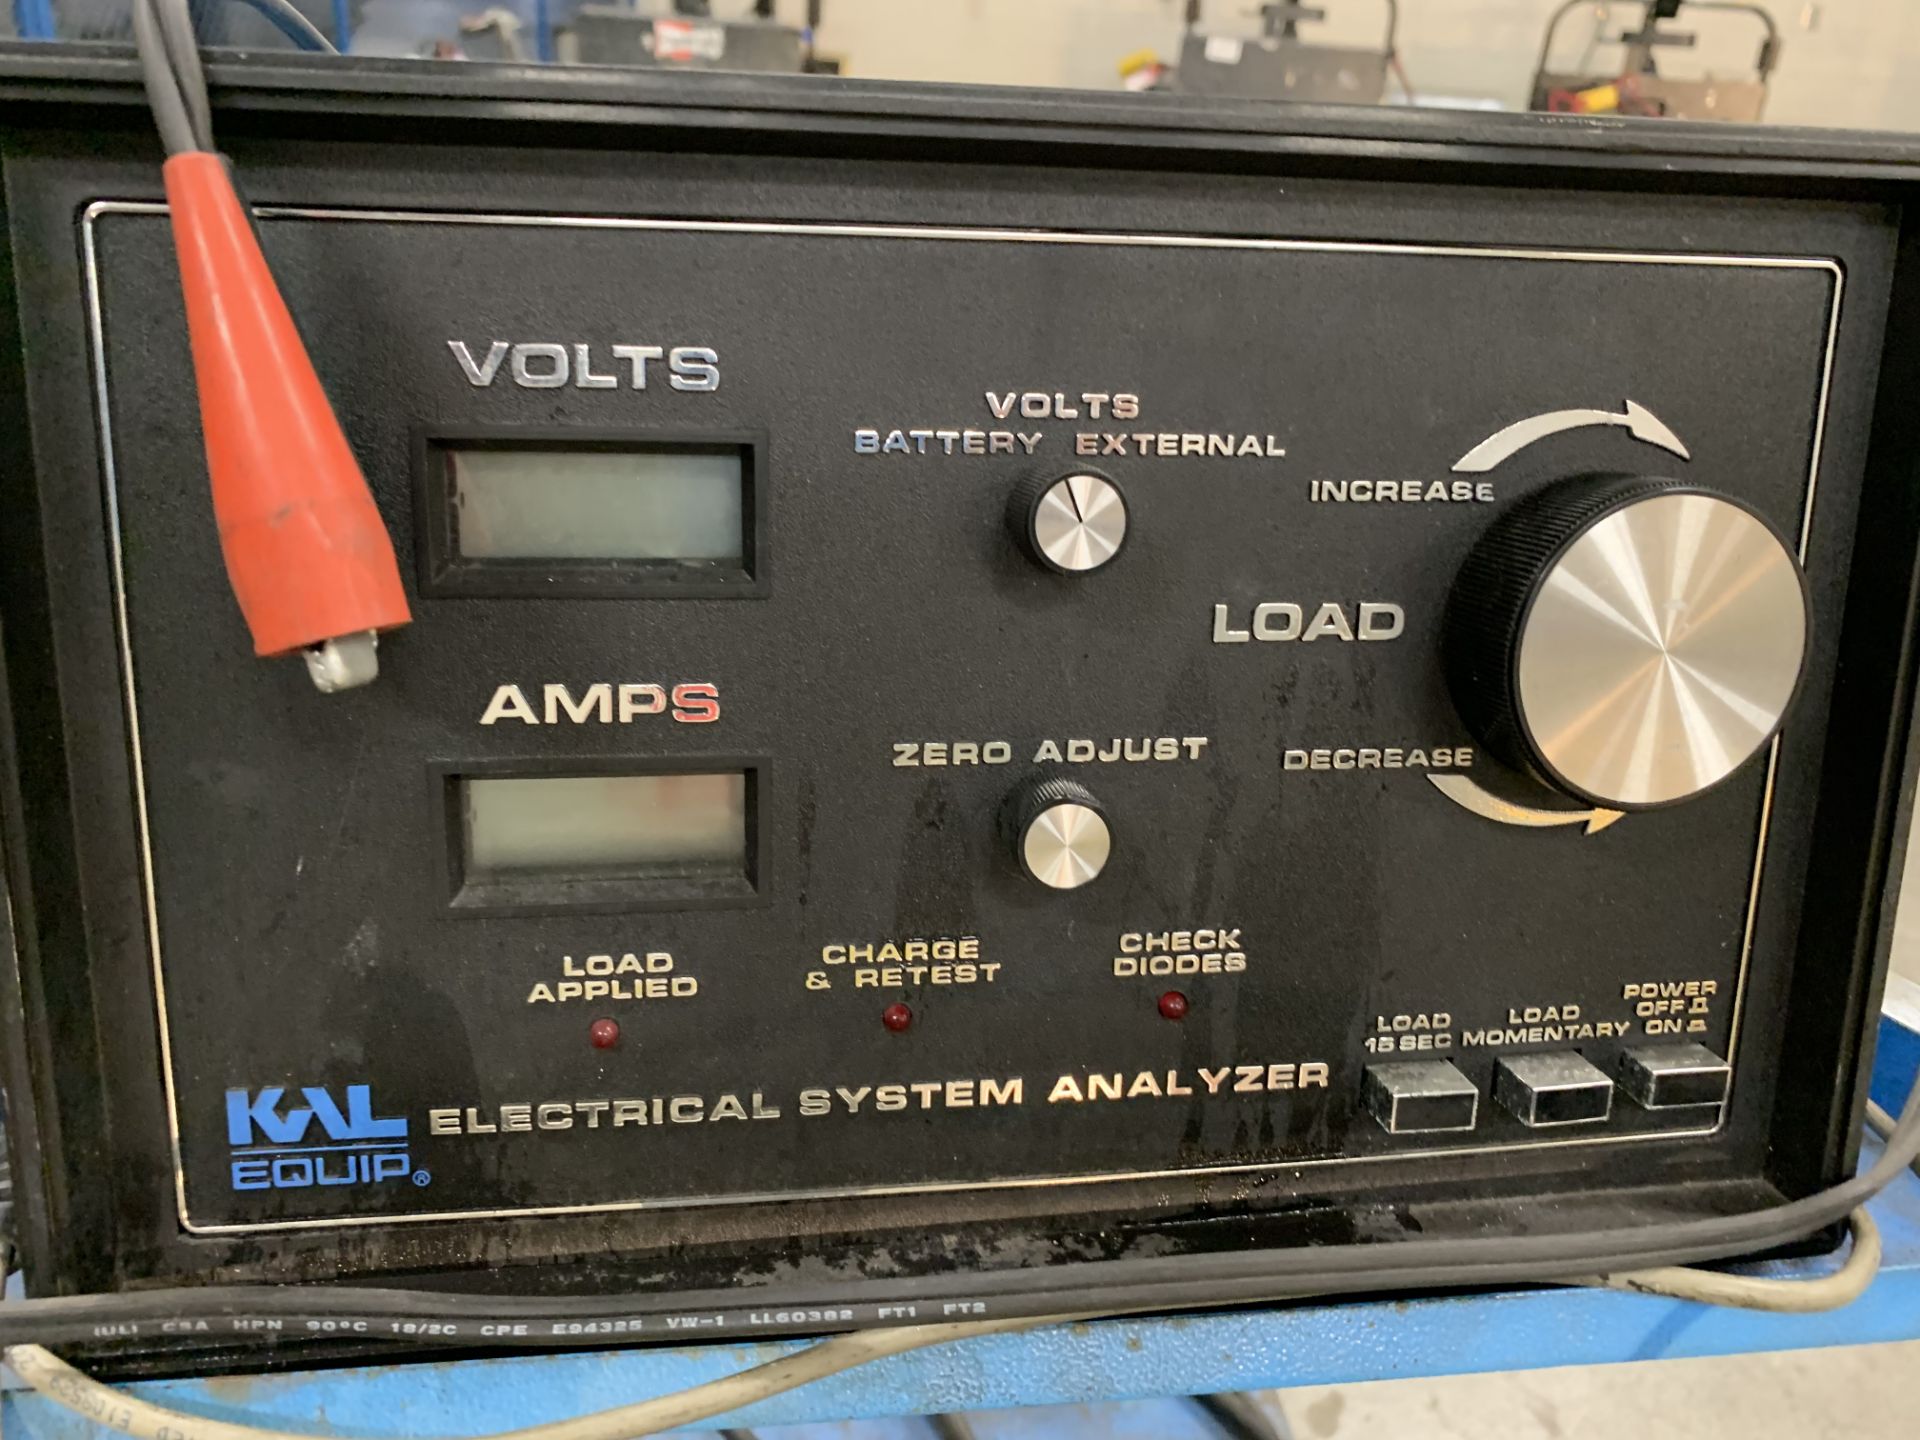 KAL Equip Electrical System Analyzer Battery Load Tester - Image 2 of 2